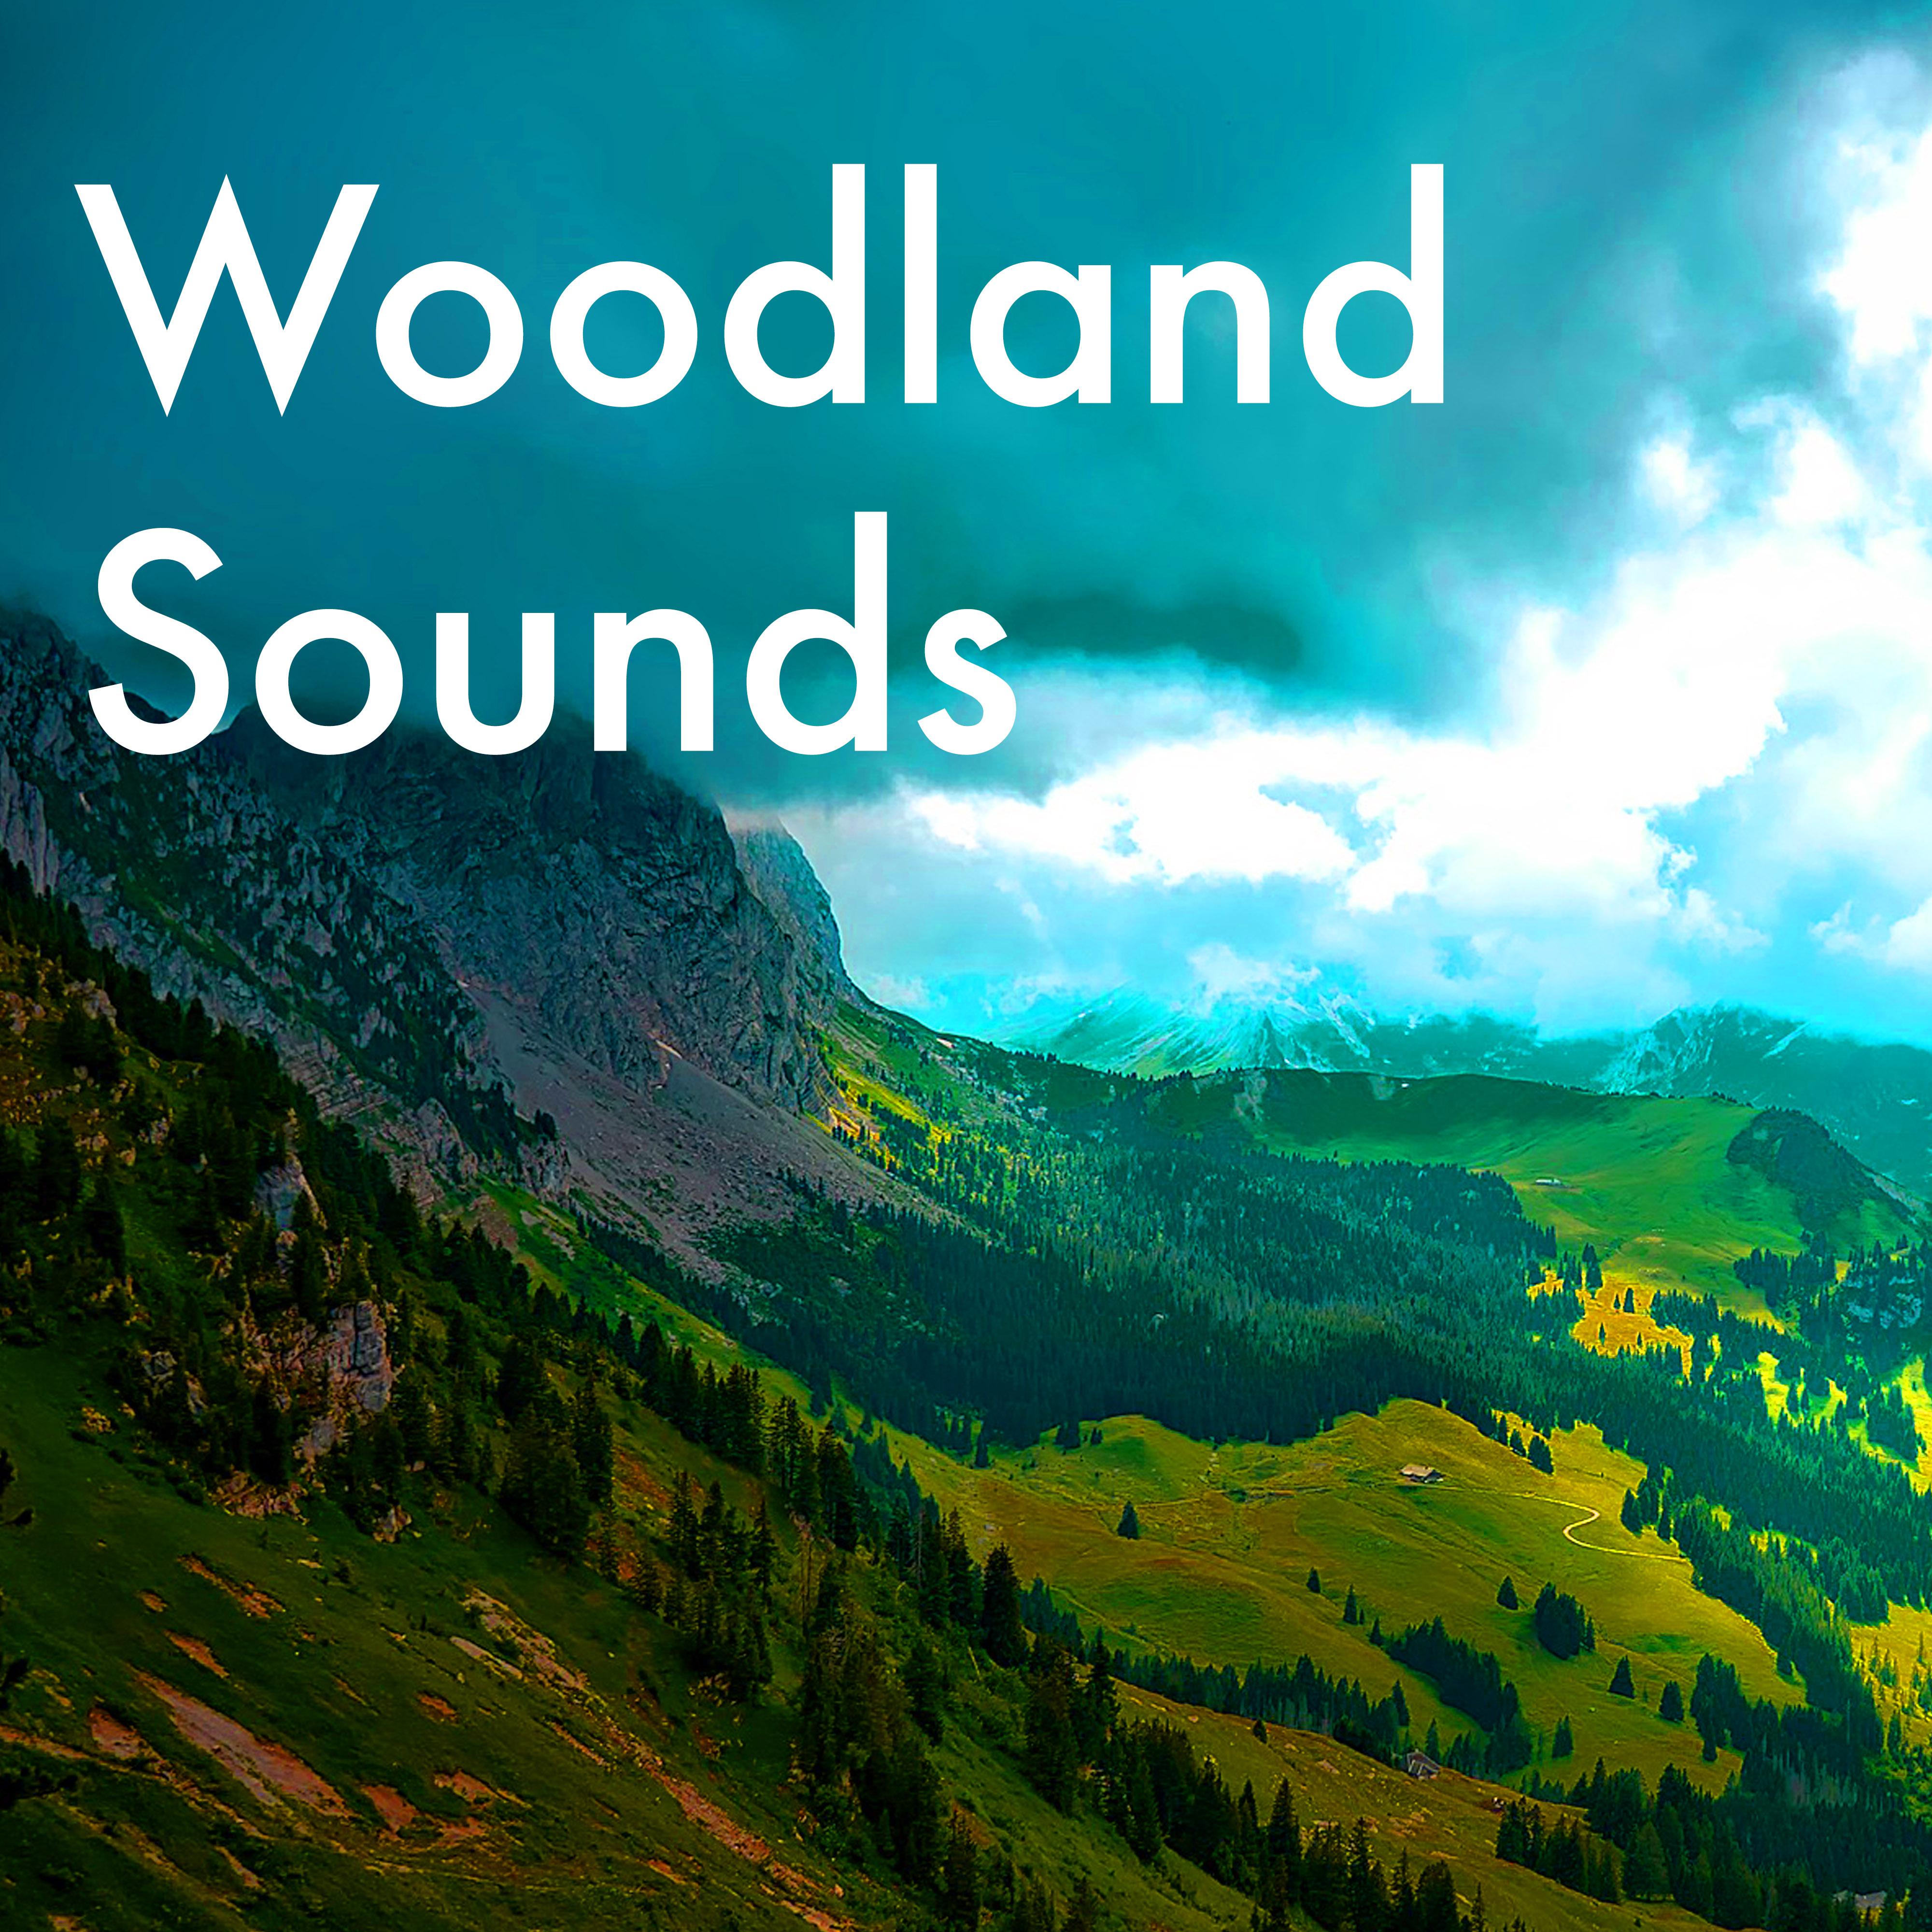 Woodland Sounds - Natural White Noise, Forest Sounds for Deep Relaxation, Reading and Studying